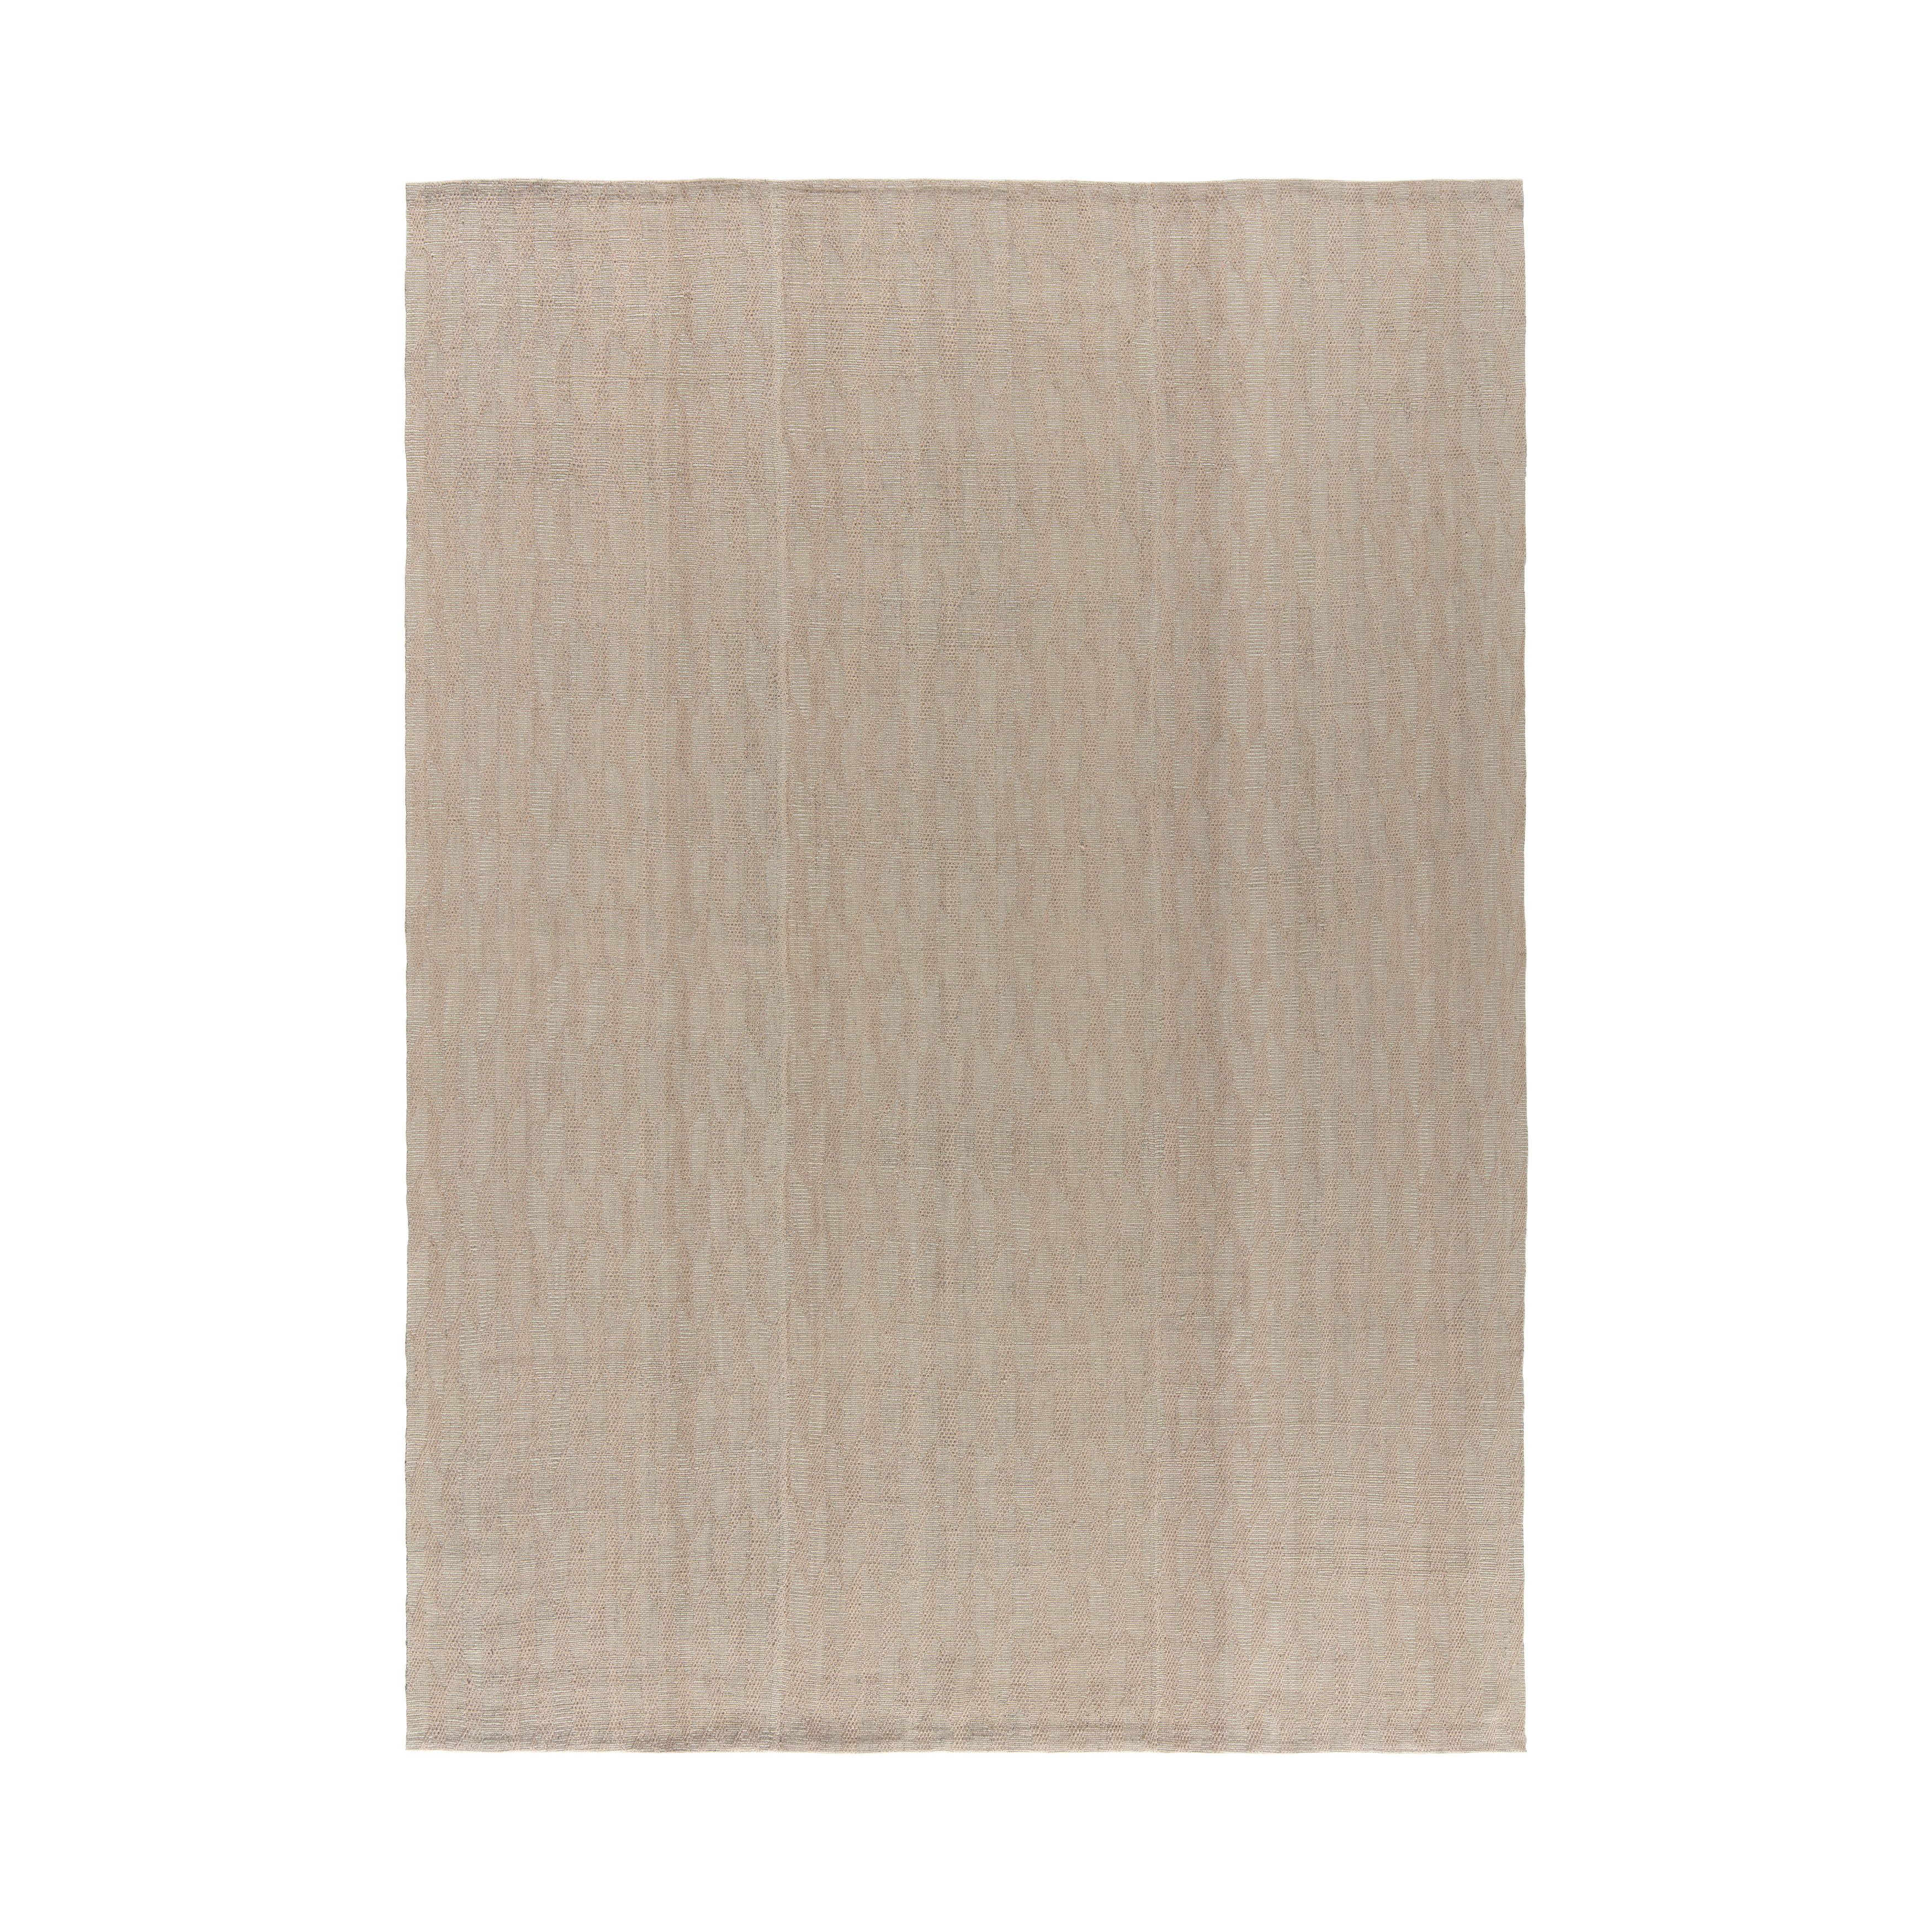 This Pelas Spearhead flatweave rug is made with handspun wool and natural dyes. 